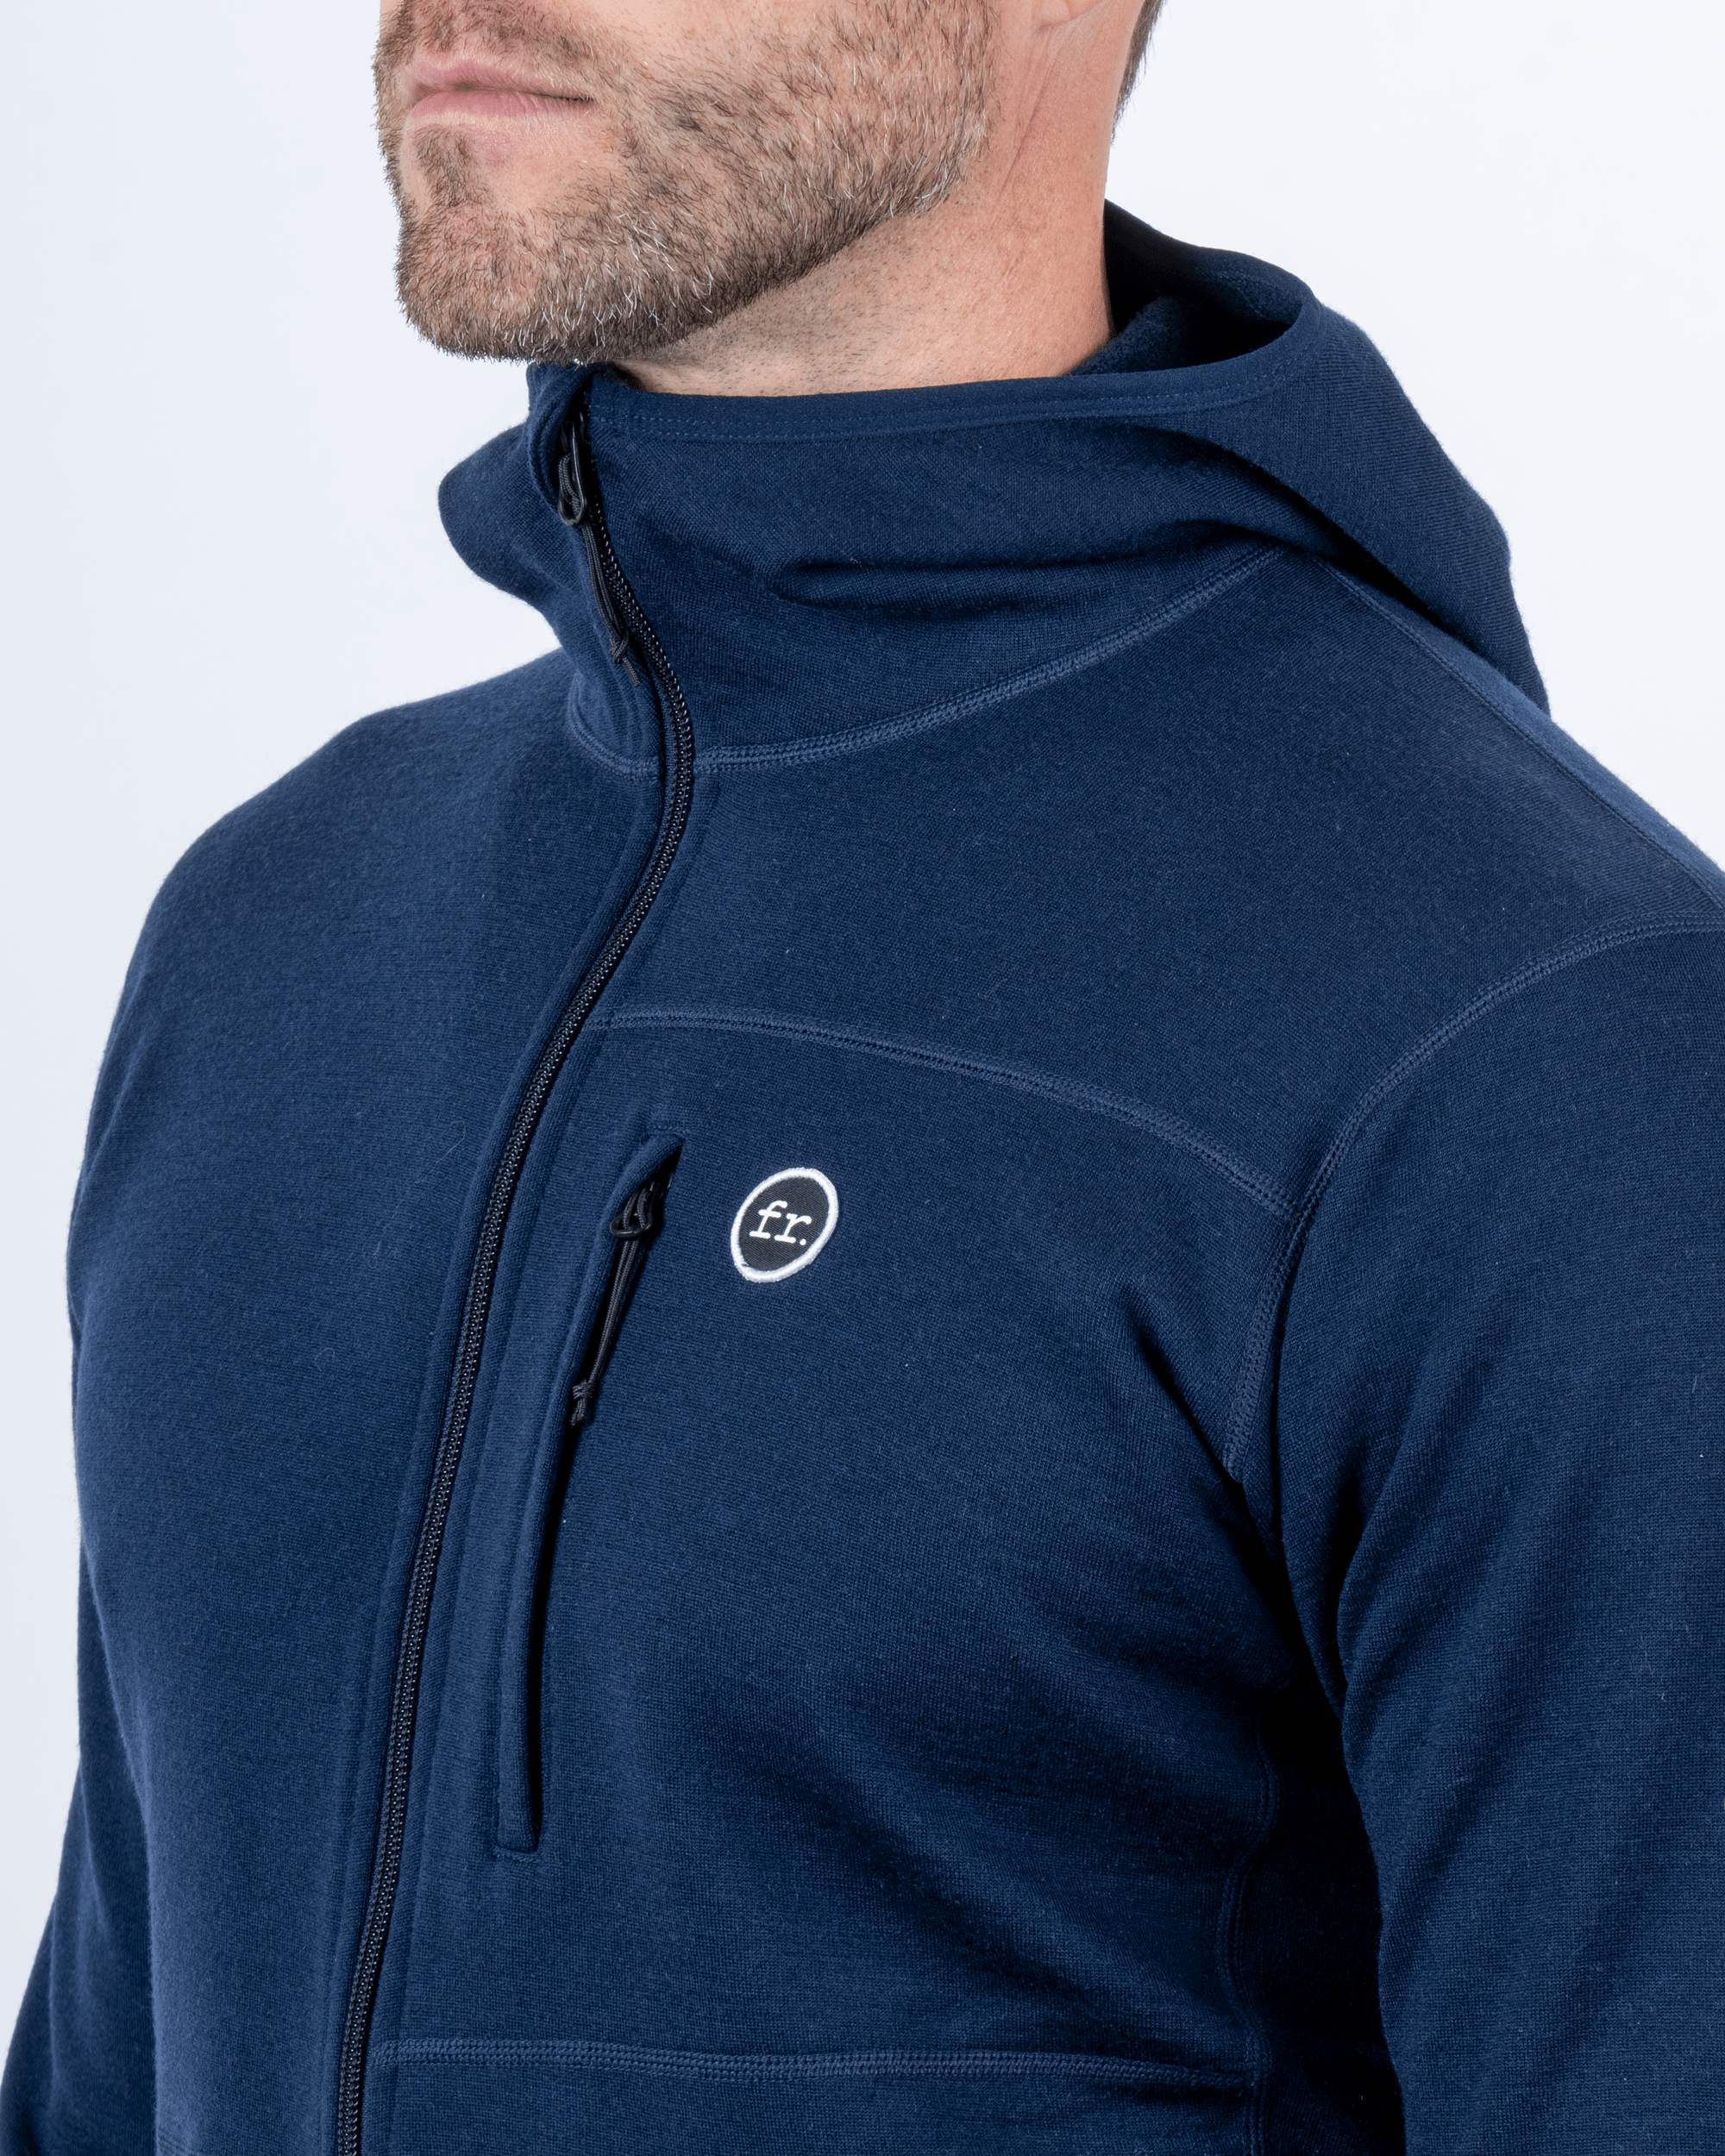 Foreign Rider Co Nuyarn Merino Wool Navy Hooded Jacket Chest Logo and Zip Pocket